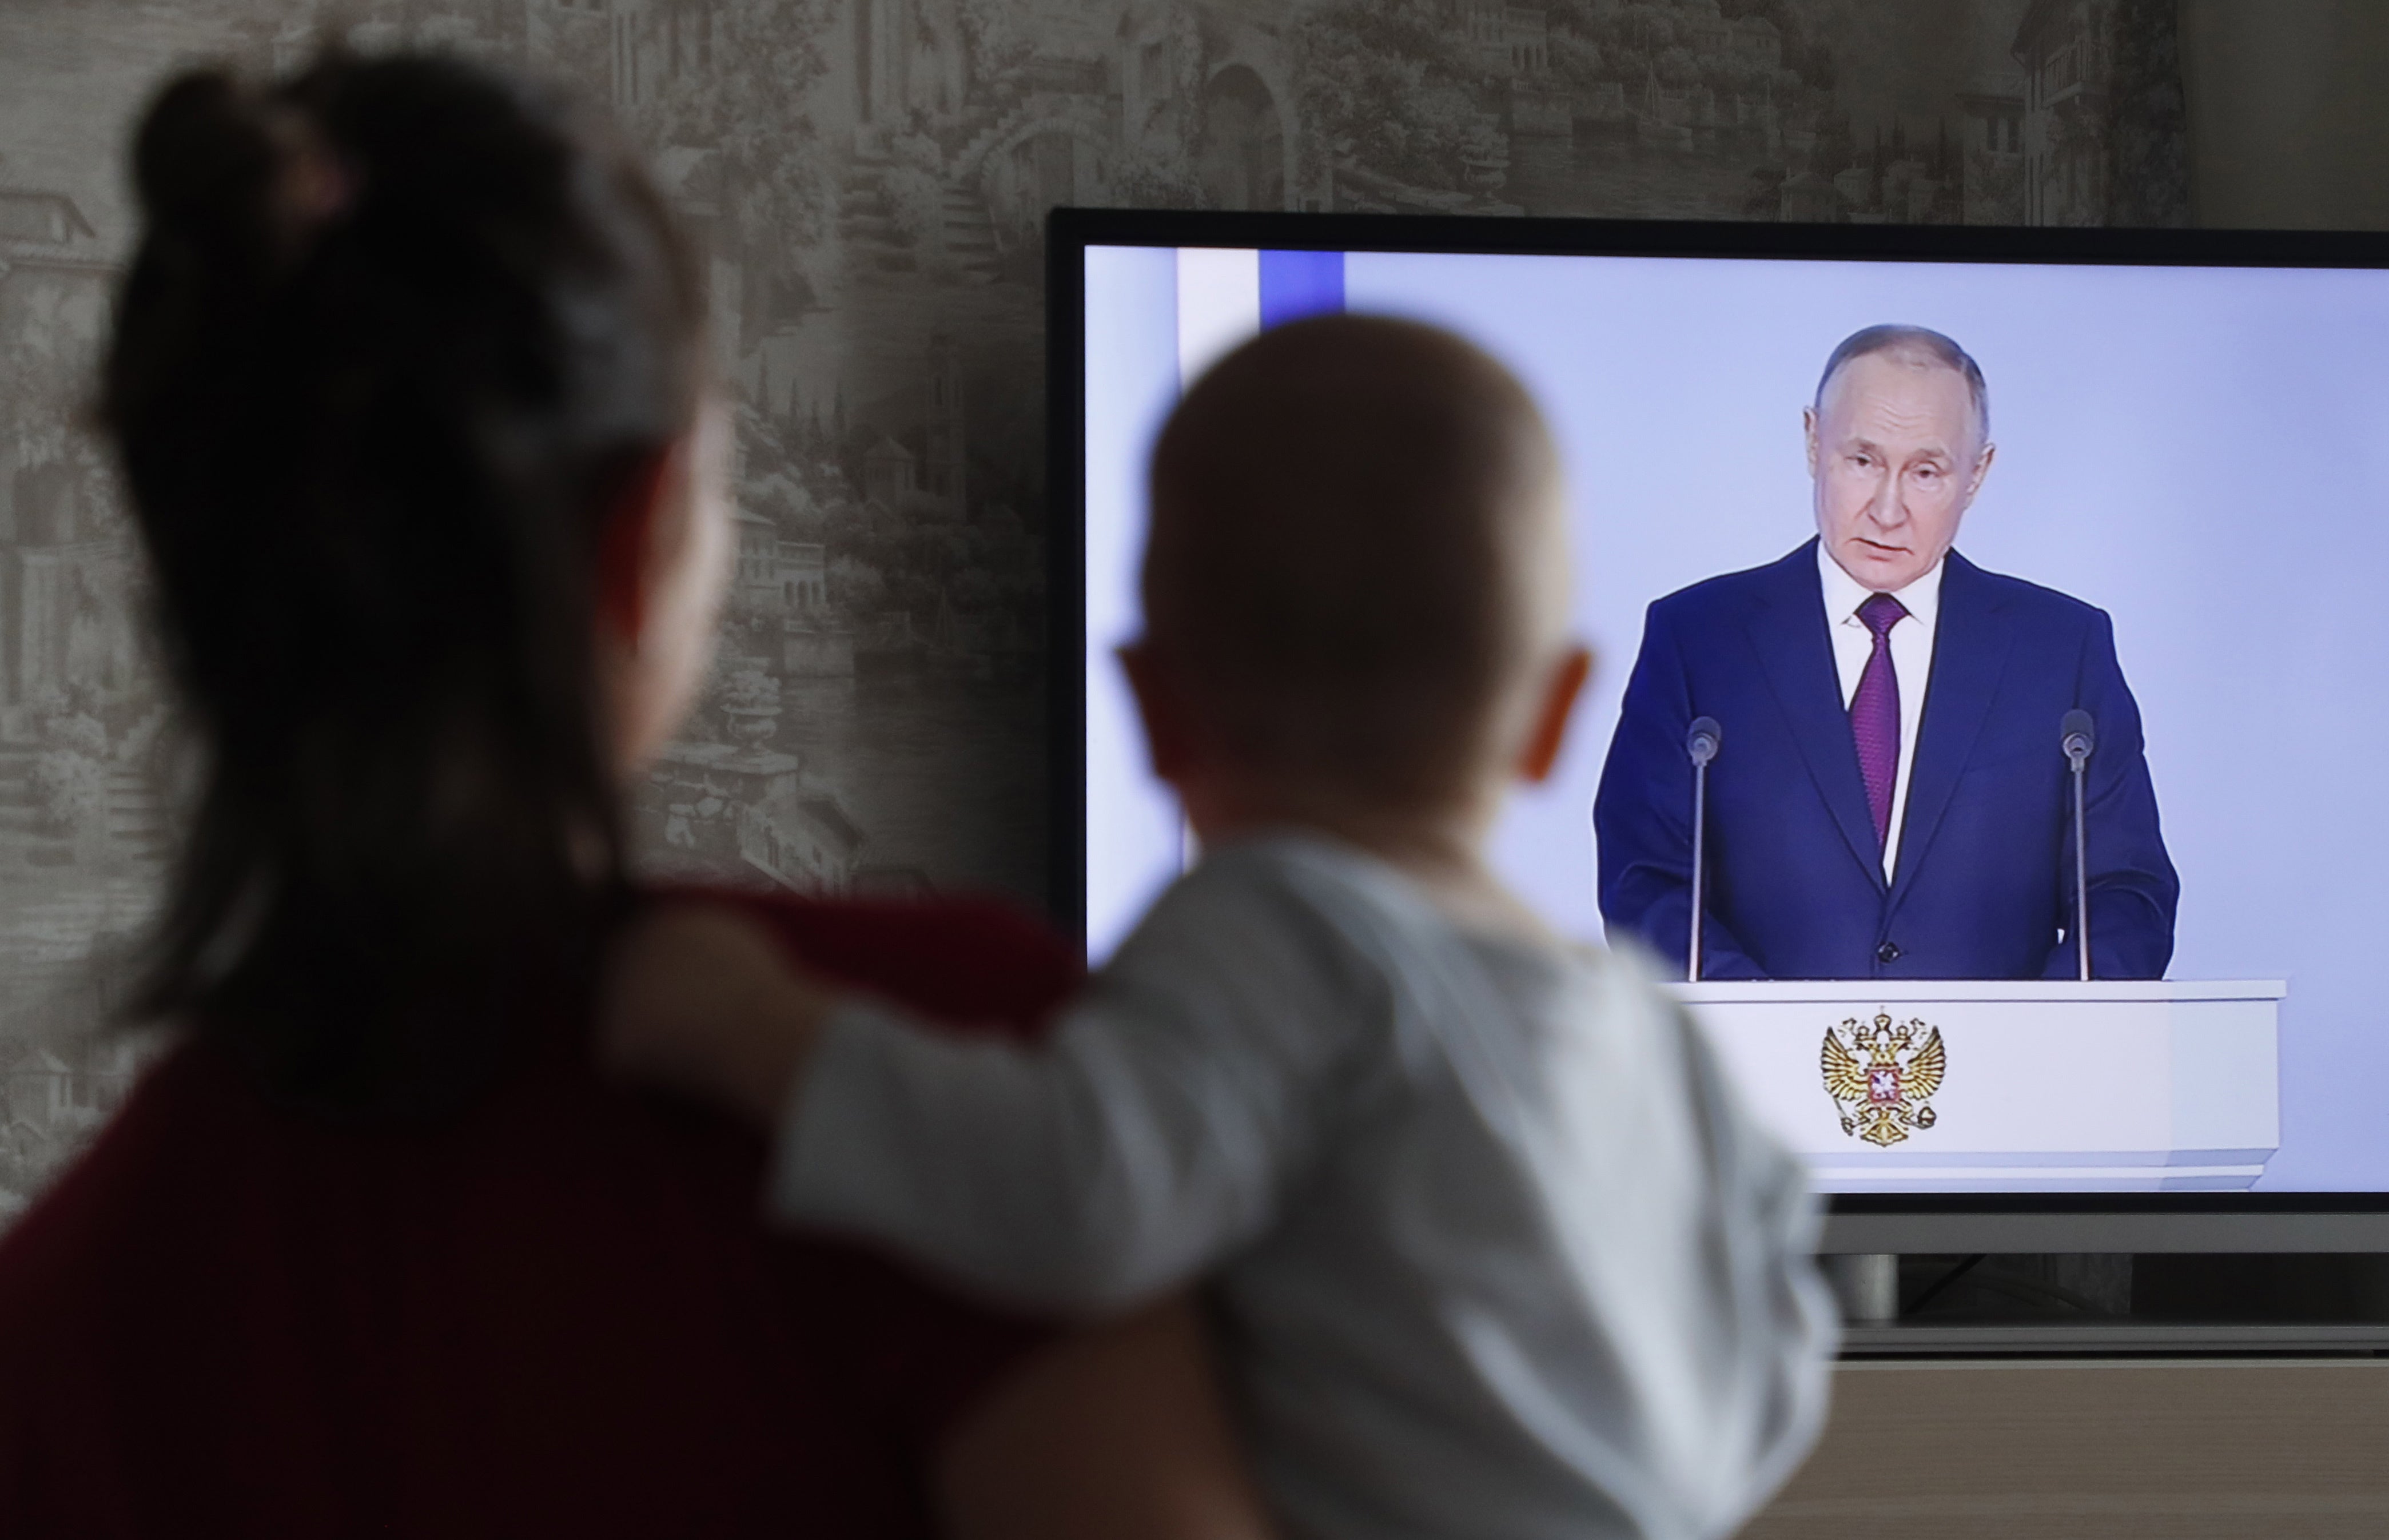 A woman holds her child as she watches the televised address by Russian president Vladimir Putin